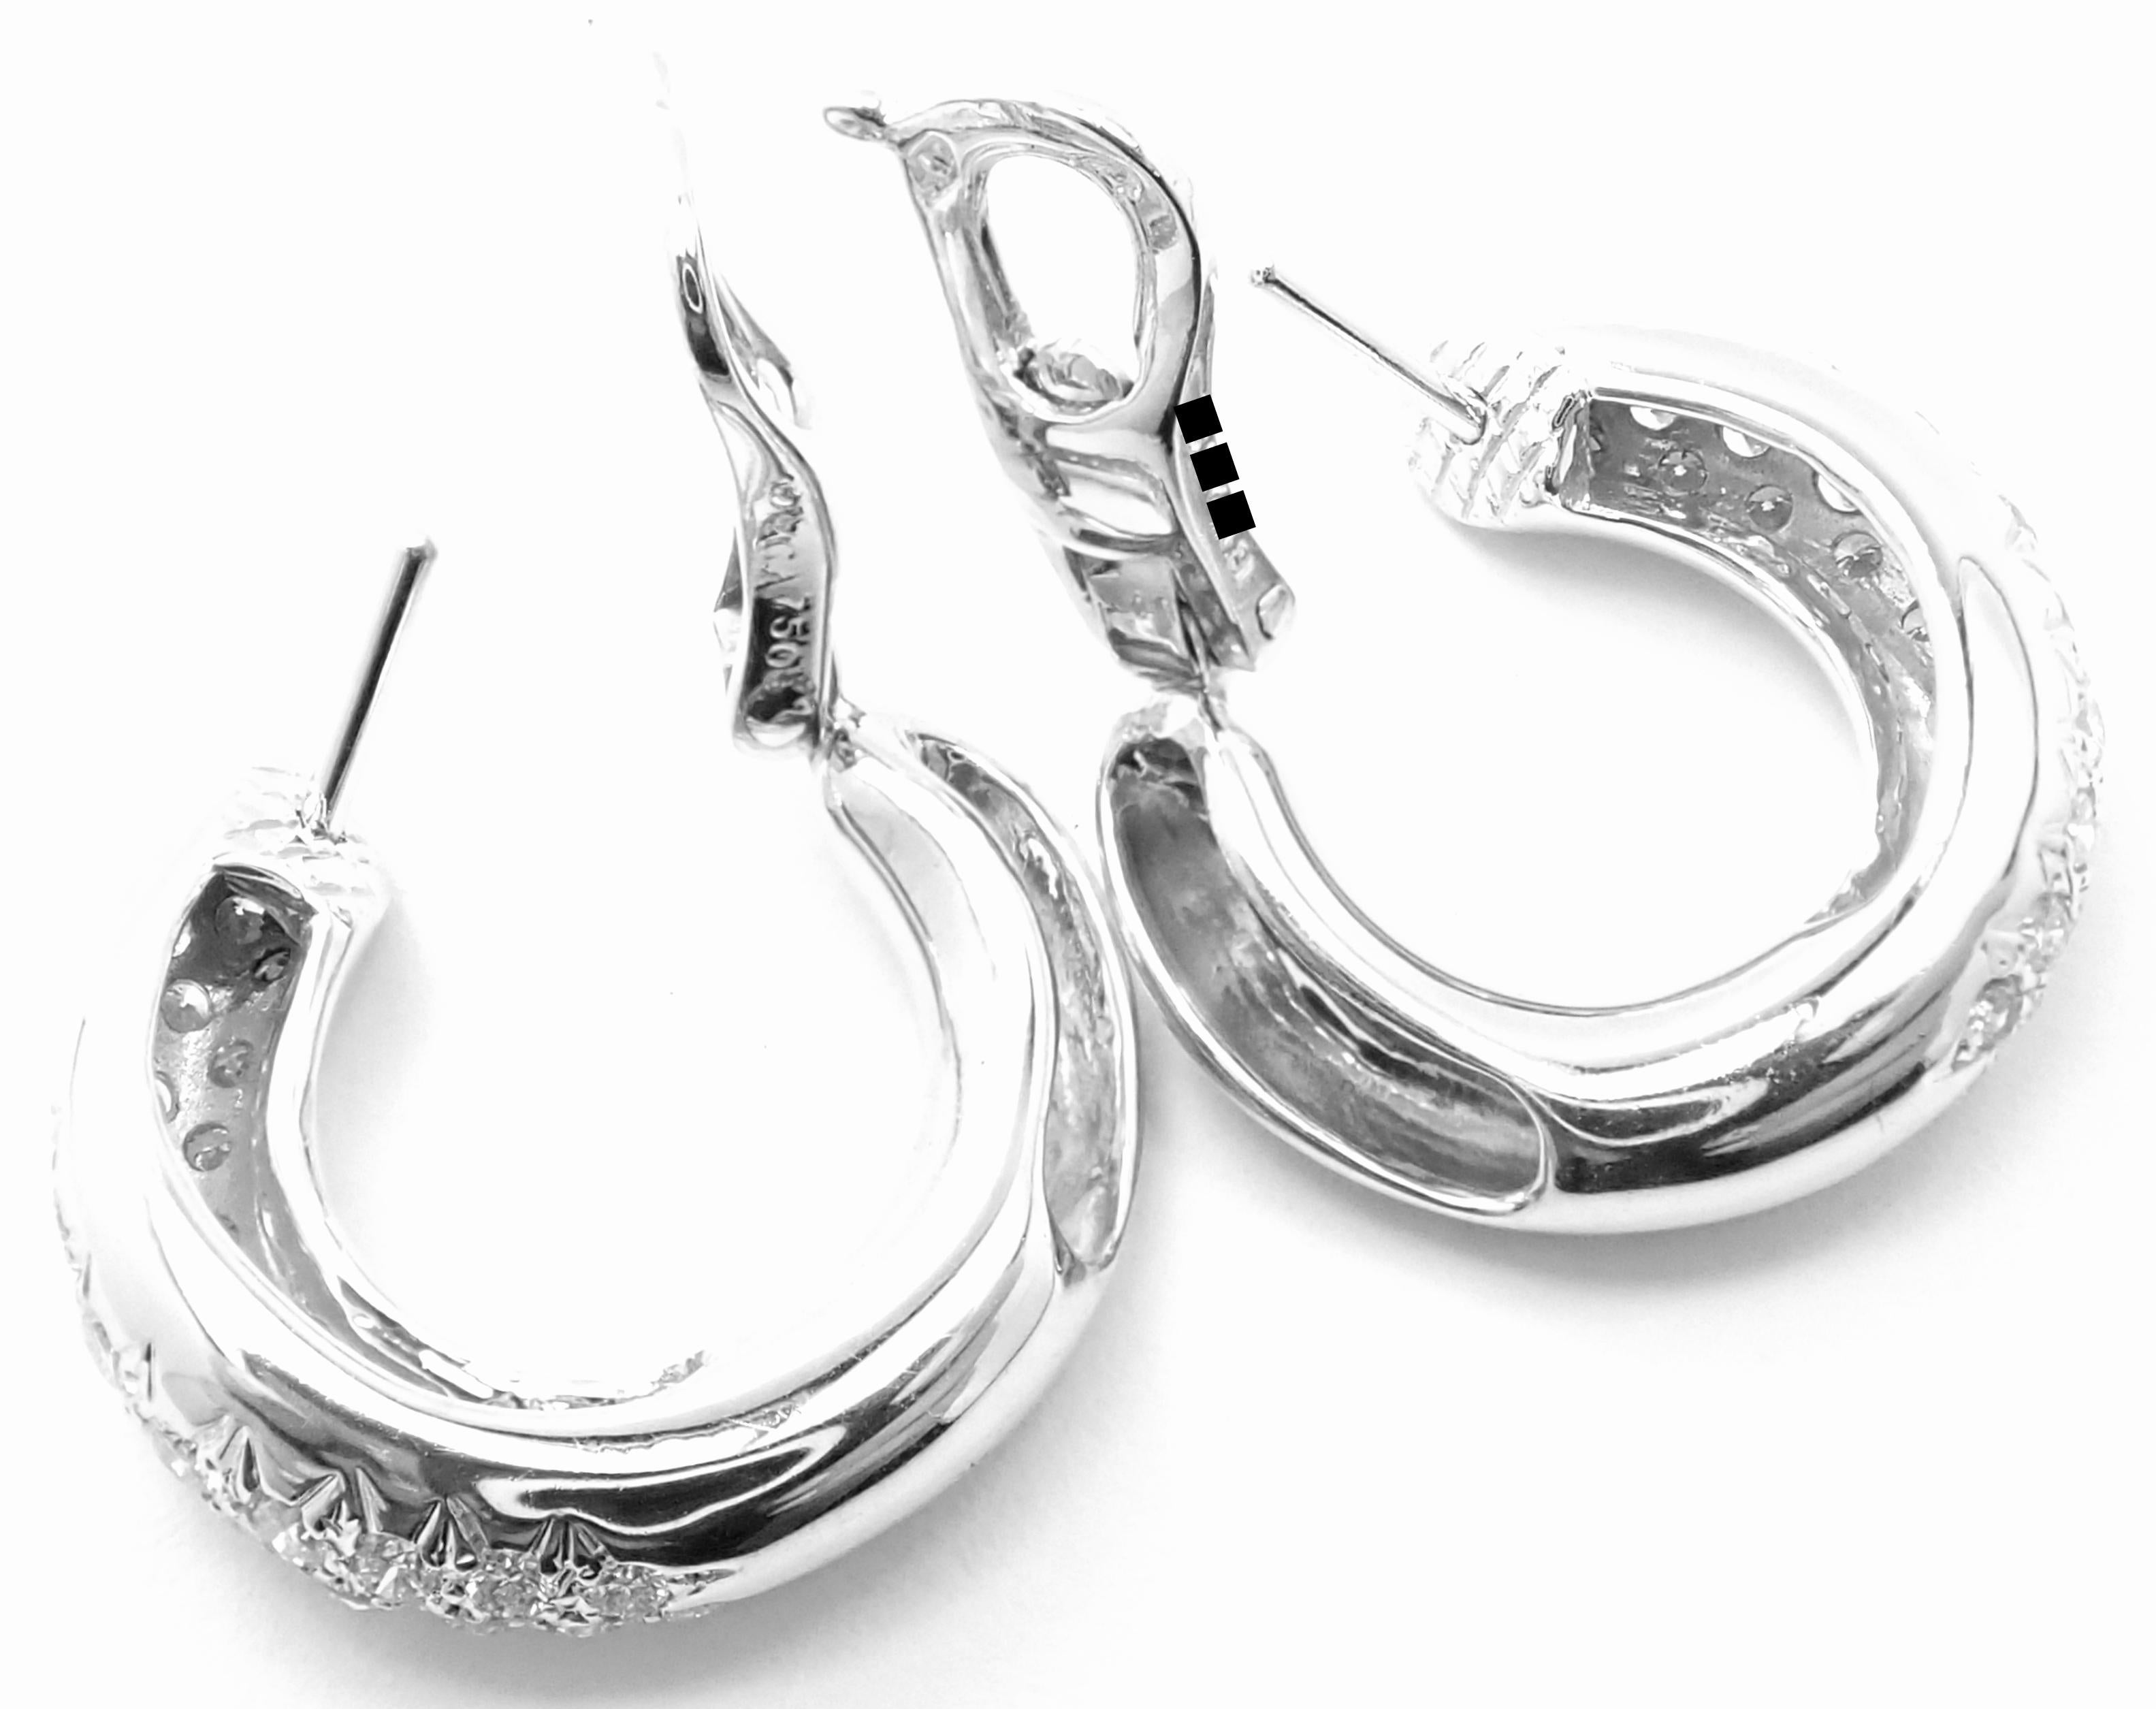 Van Cleef & Arpels Diamond White Gold Hoop Earrings In Excellent Condition For Sale In Holland, PA